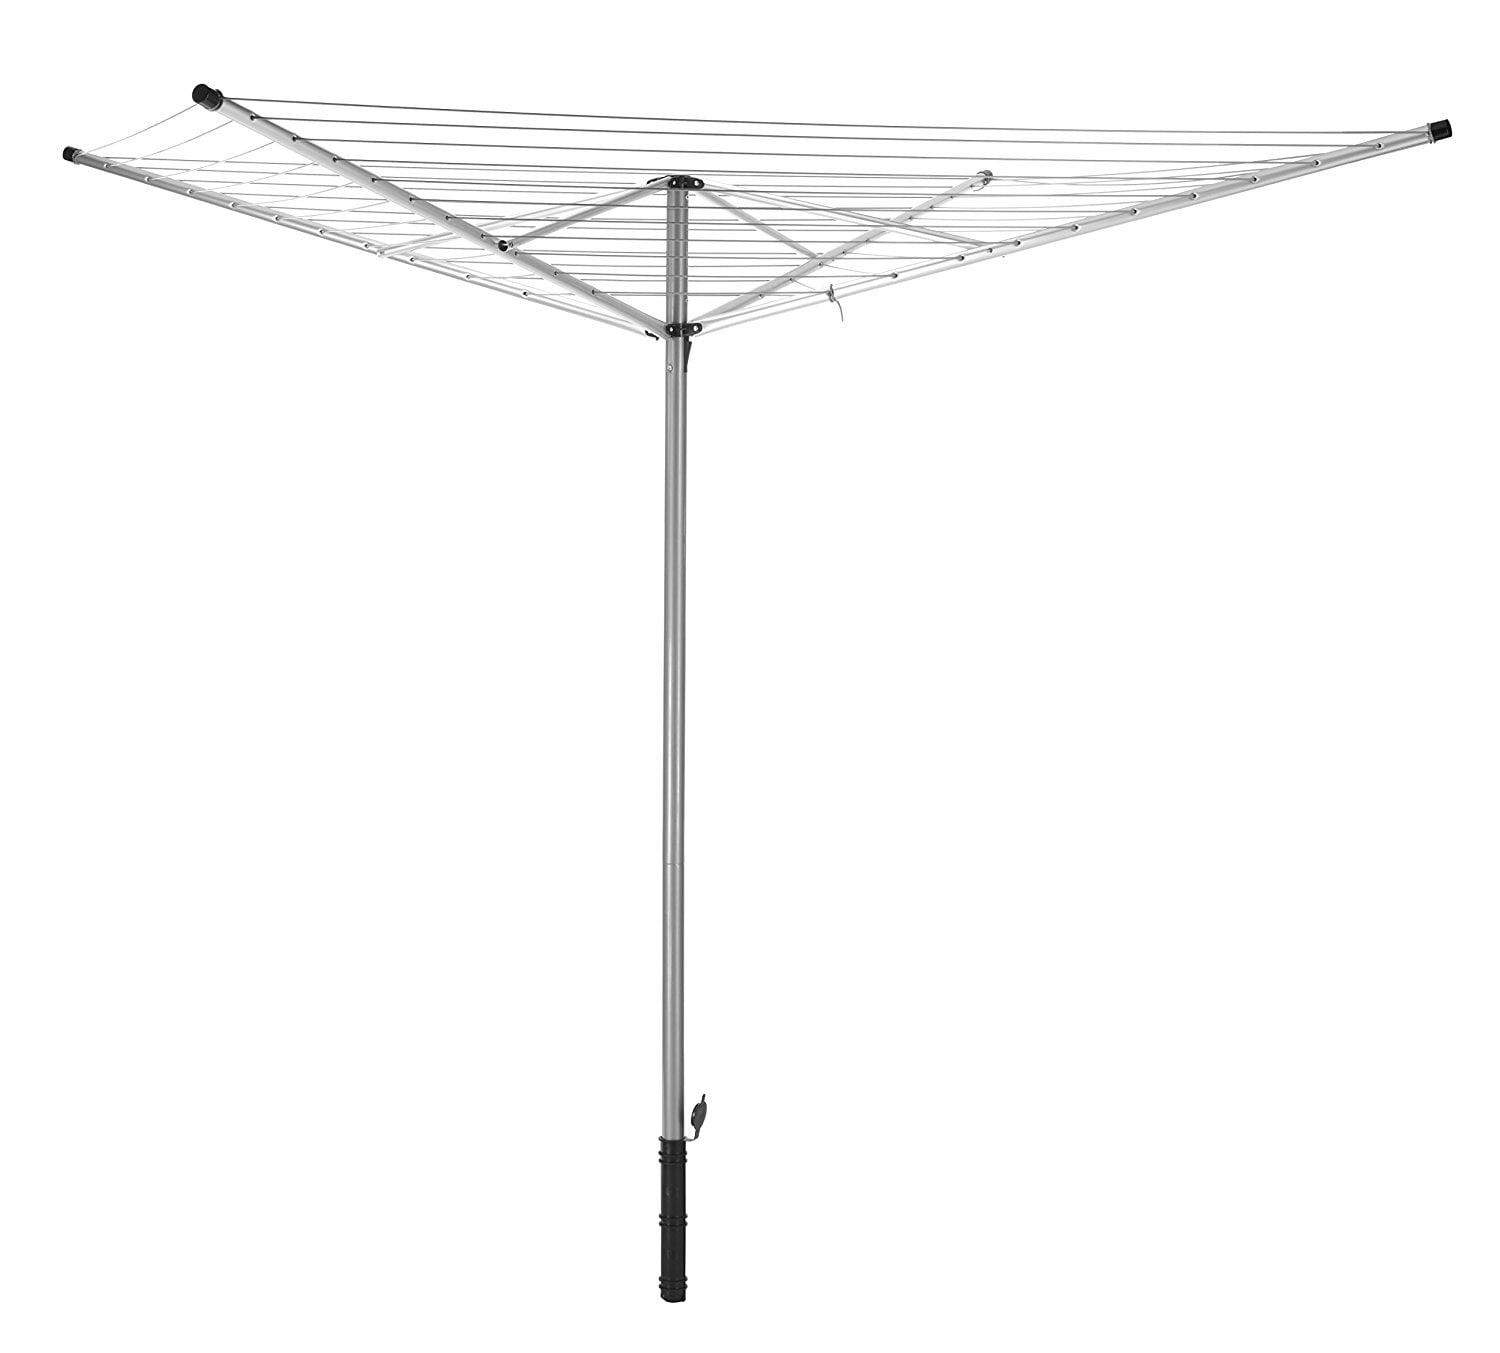 Details about   NEW In Ground Umbrella Dryer 165-feet Drying Line Clothesline Hanger White Large 